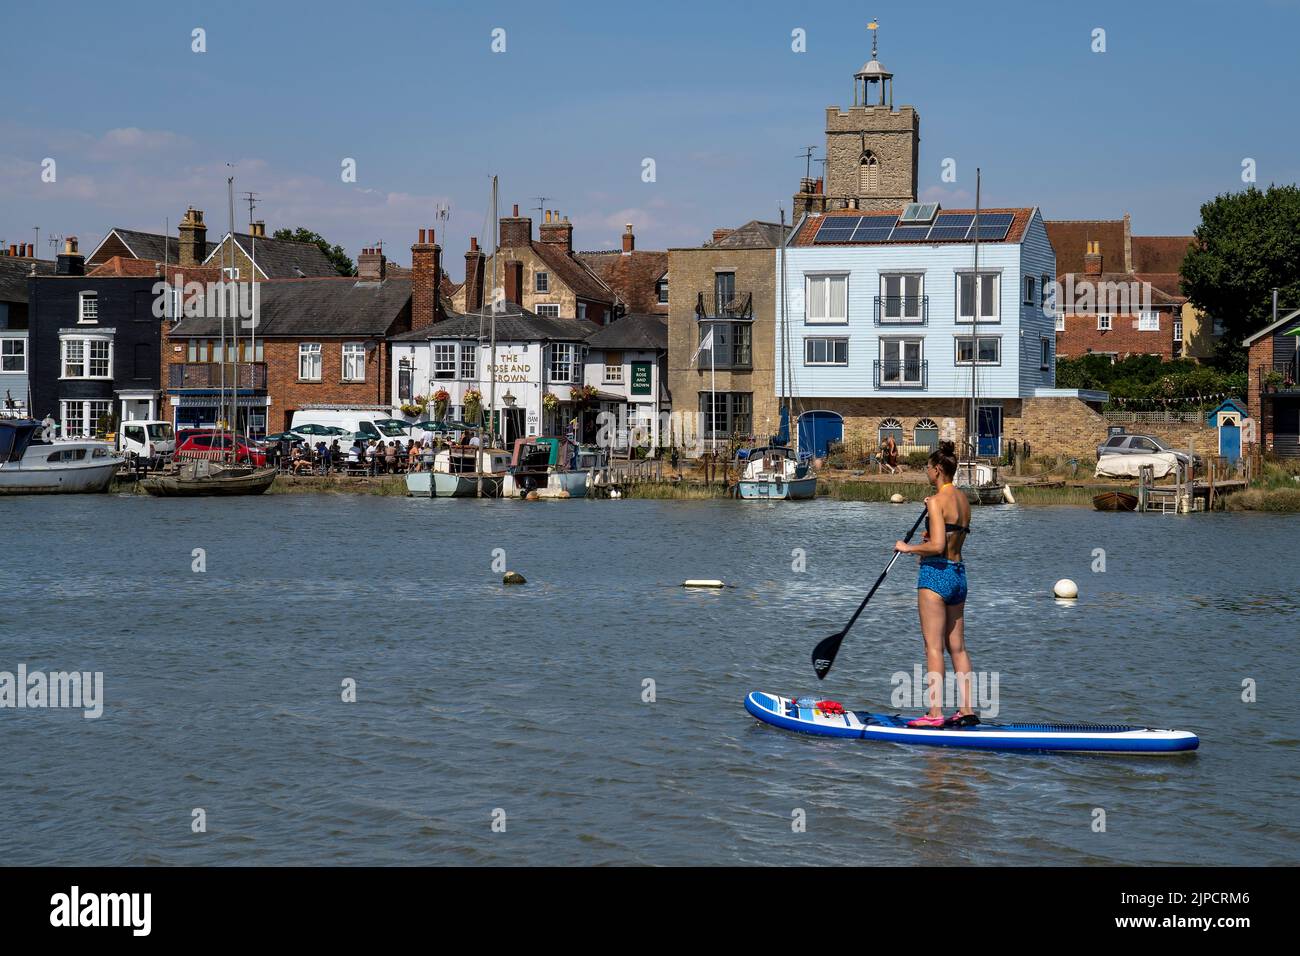 WIVENHOE IN ESSEX, PICTURED FROM THE OPPOSITE SHORE (ROWHEDGE). THE ROSE AND CROWN PUB IS VISIBLE Stock Photo